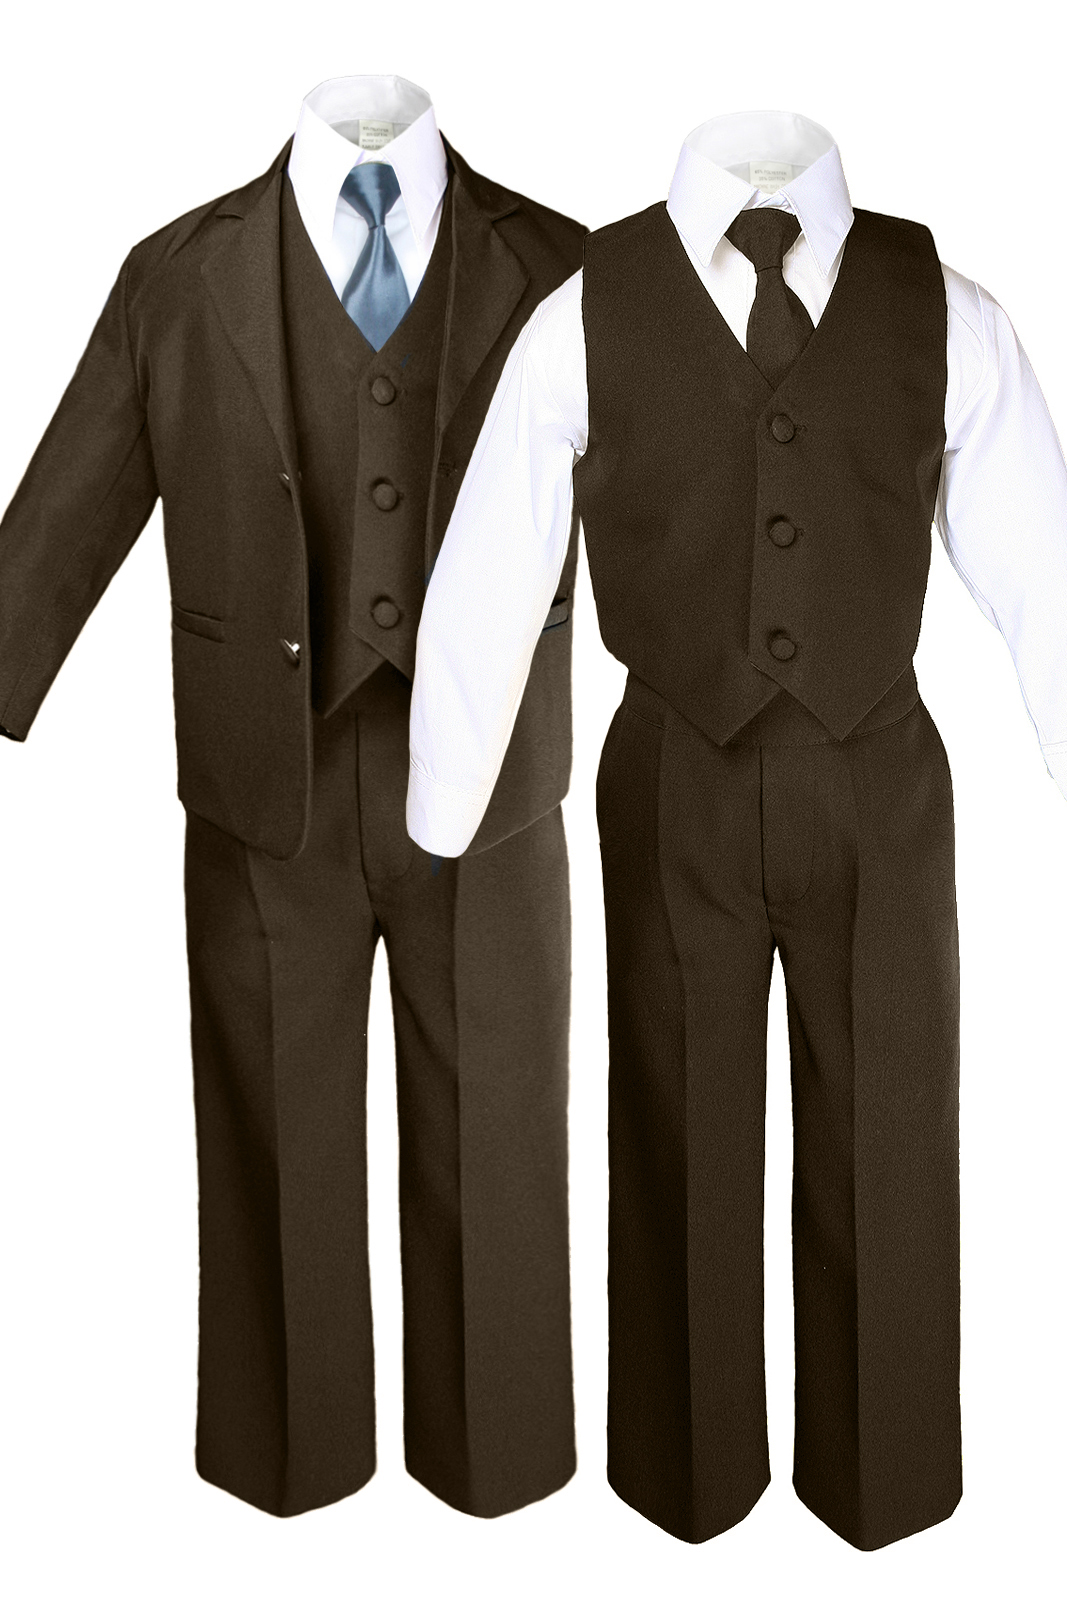 Leadertux 6pc S M L XL 2T 3T 4T Baby Toddler Boys Brown Suits Tuxedo Formal Wedding Party Outfits Extra Dark Gray Necktie Set